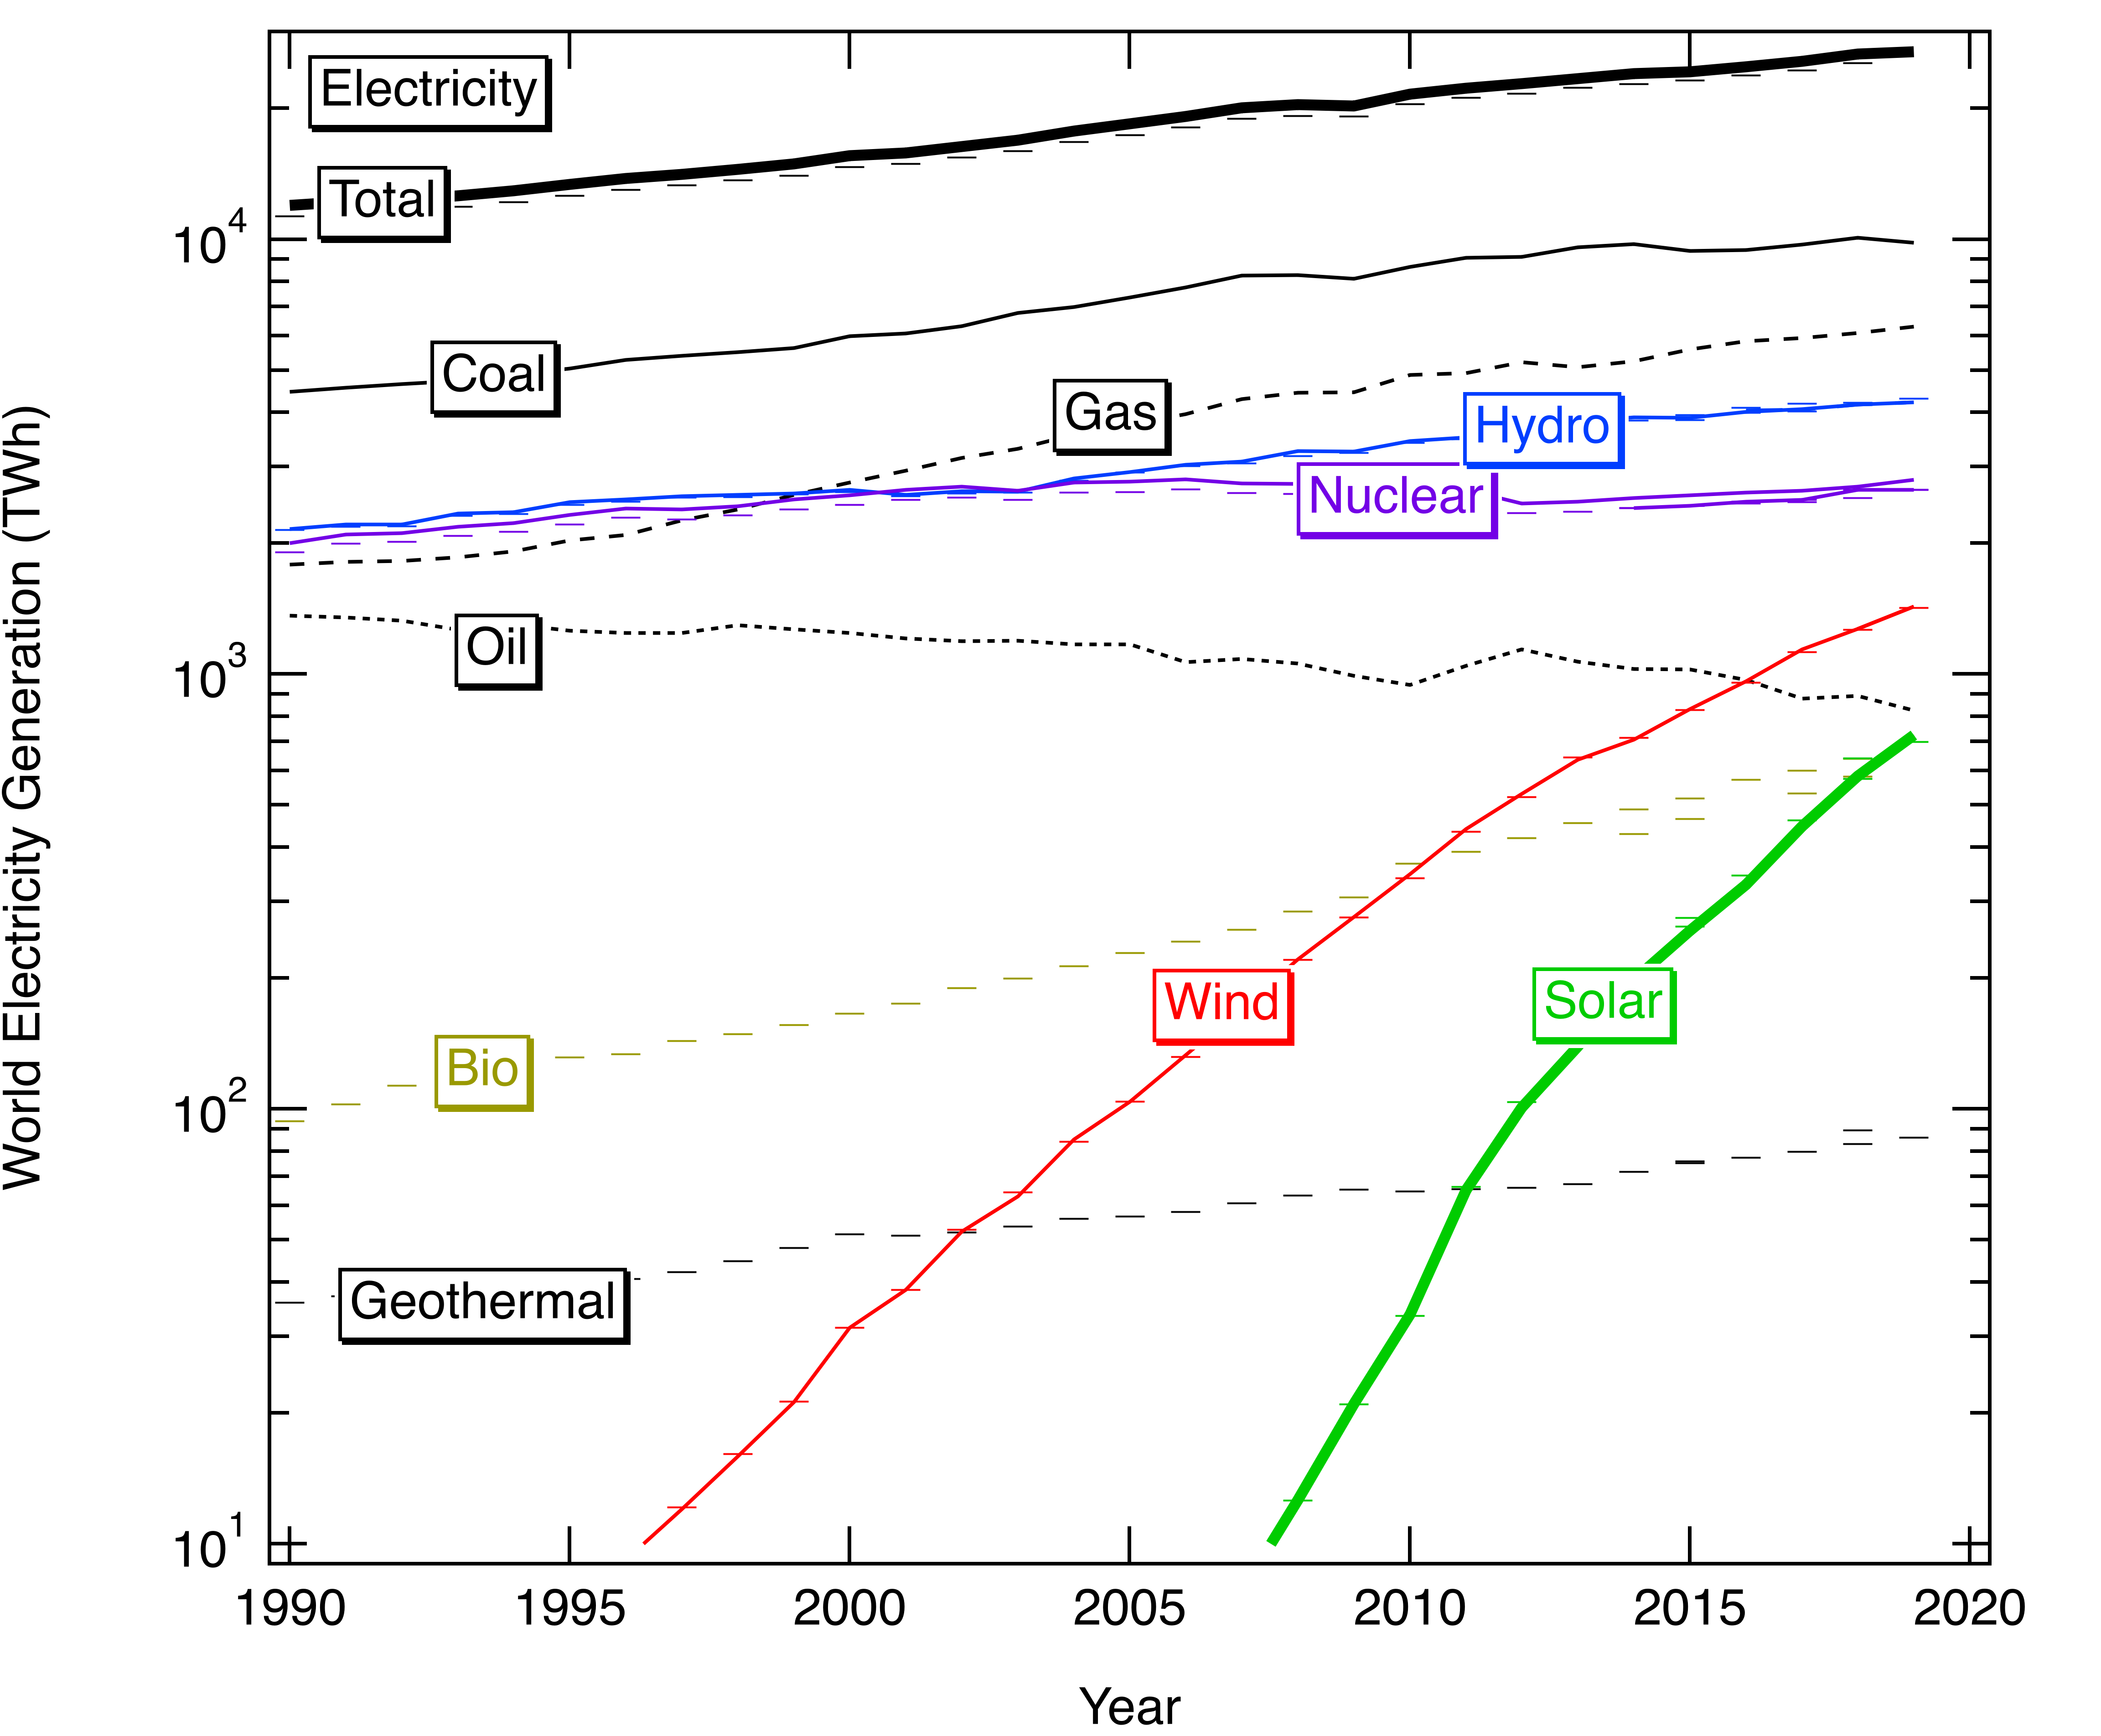 Plot of world electric generation by year